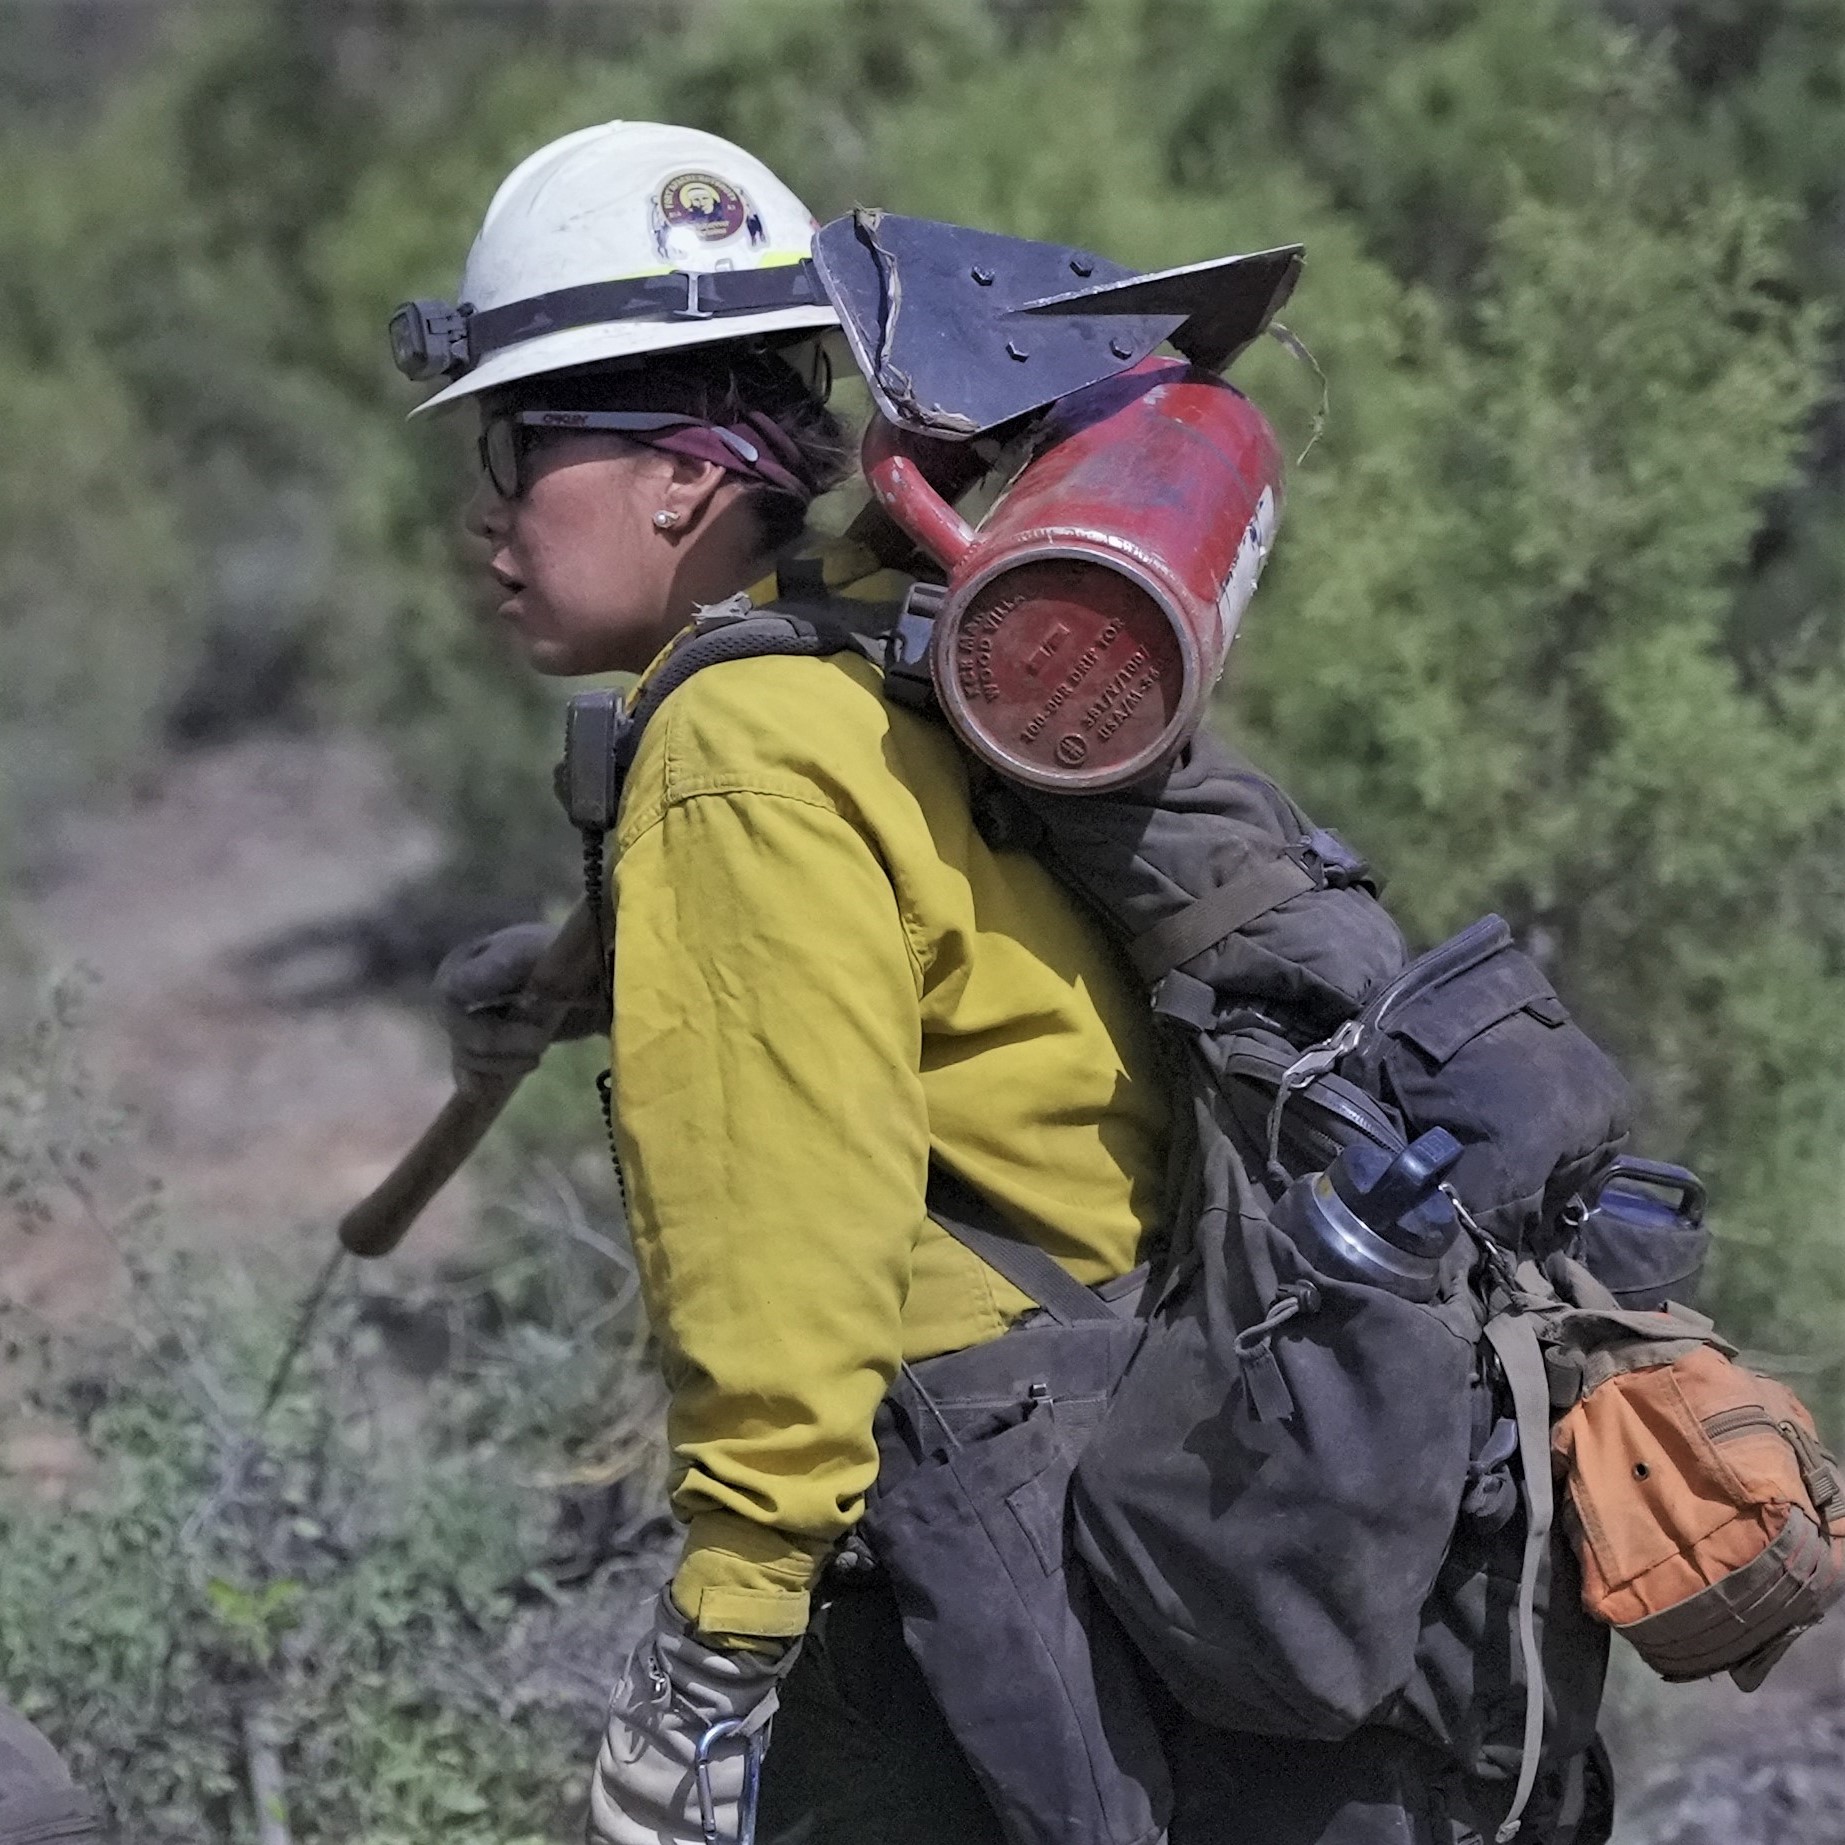 A BIA firefighter working in the field.